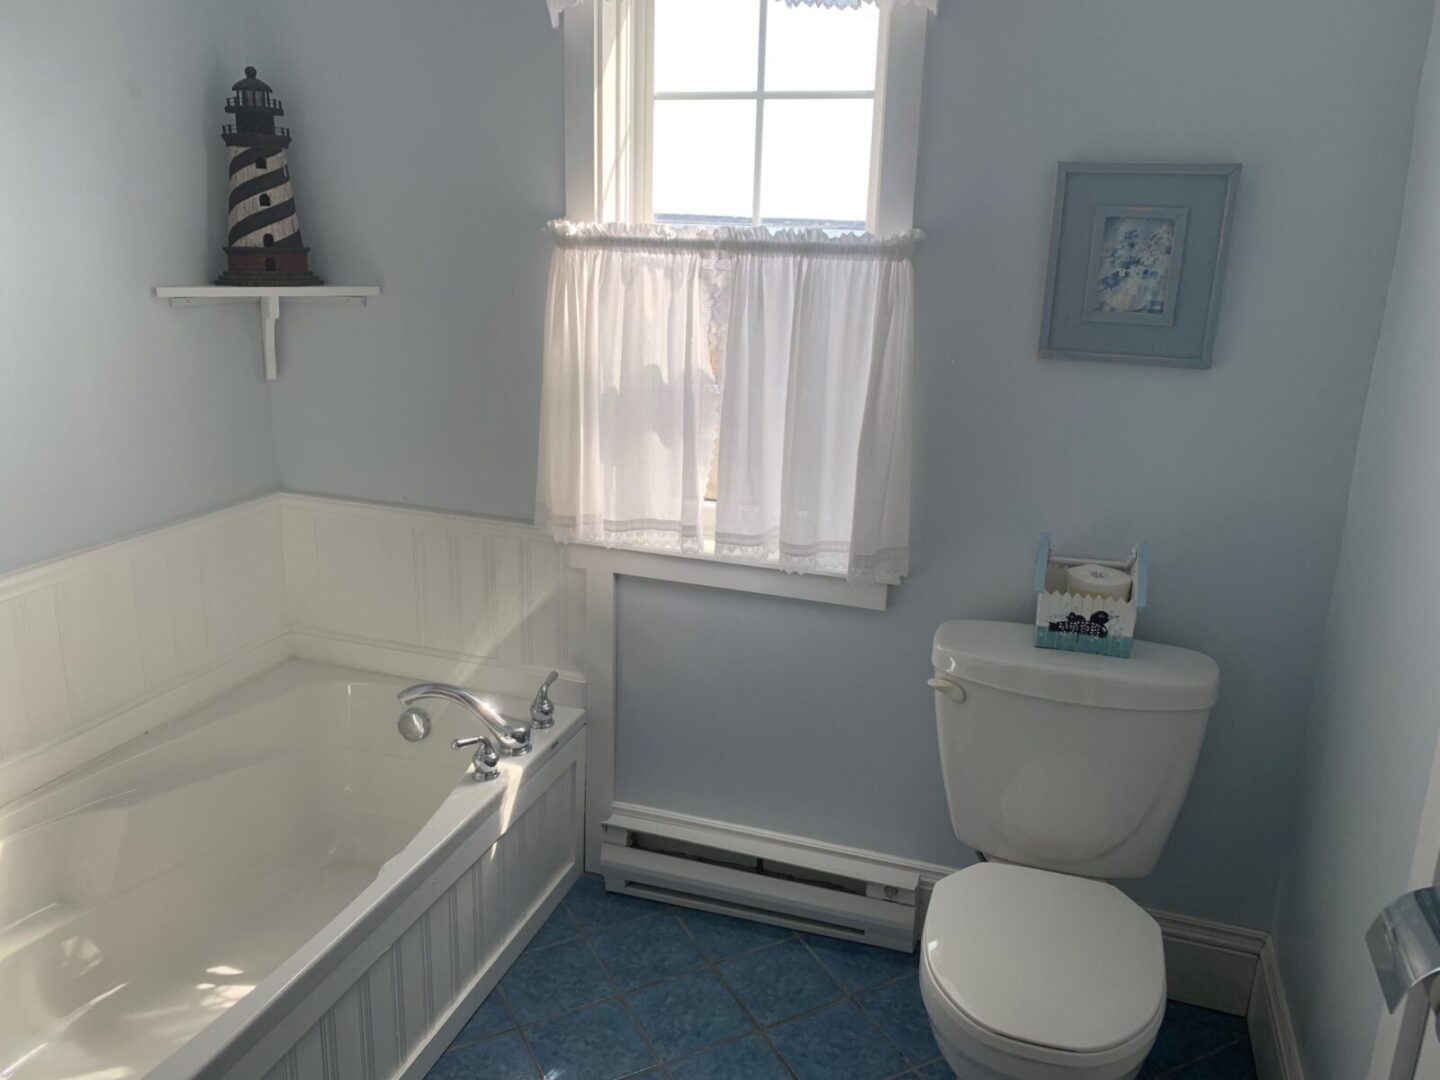 A bathroom with a toilet, sink, and tub.